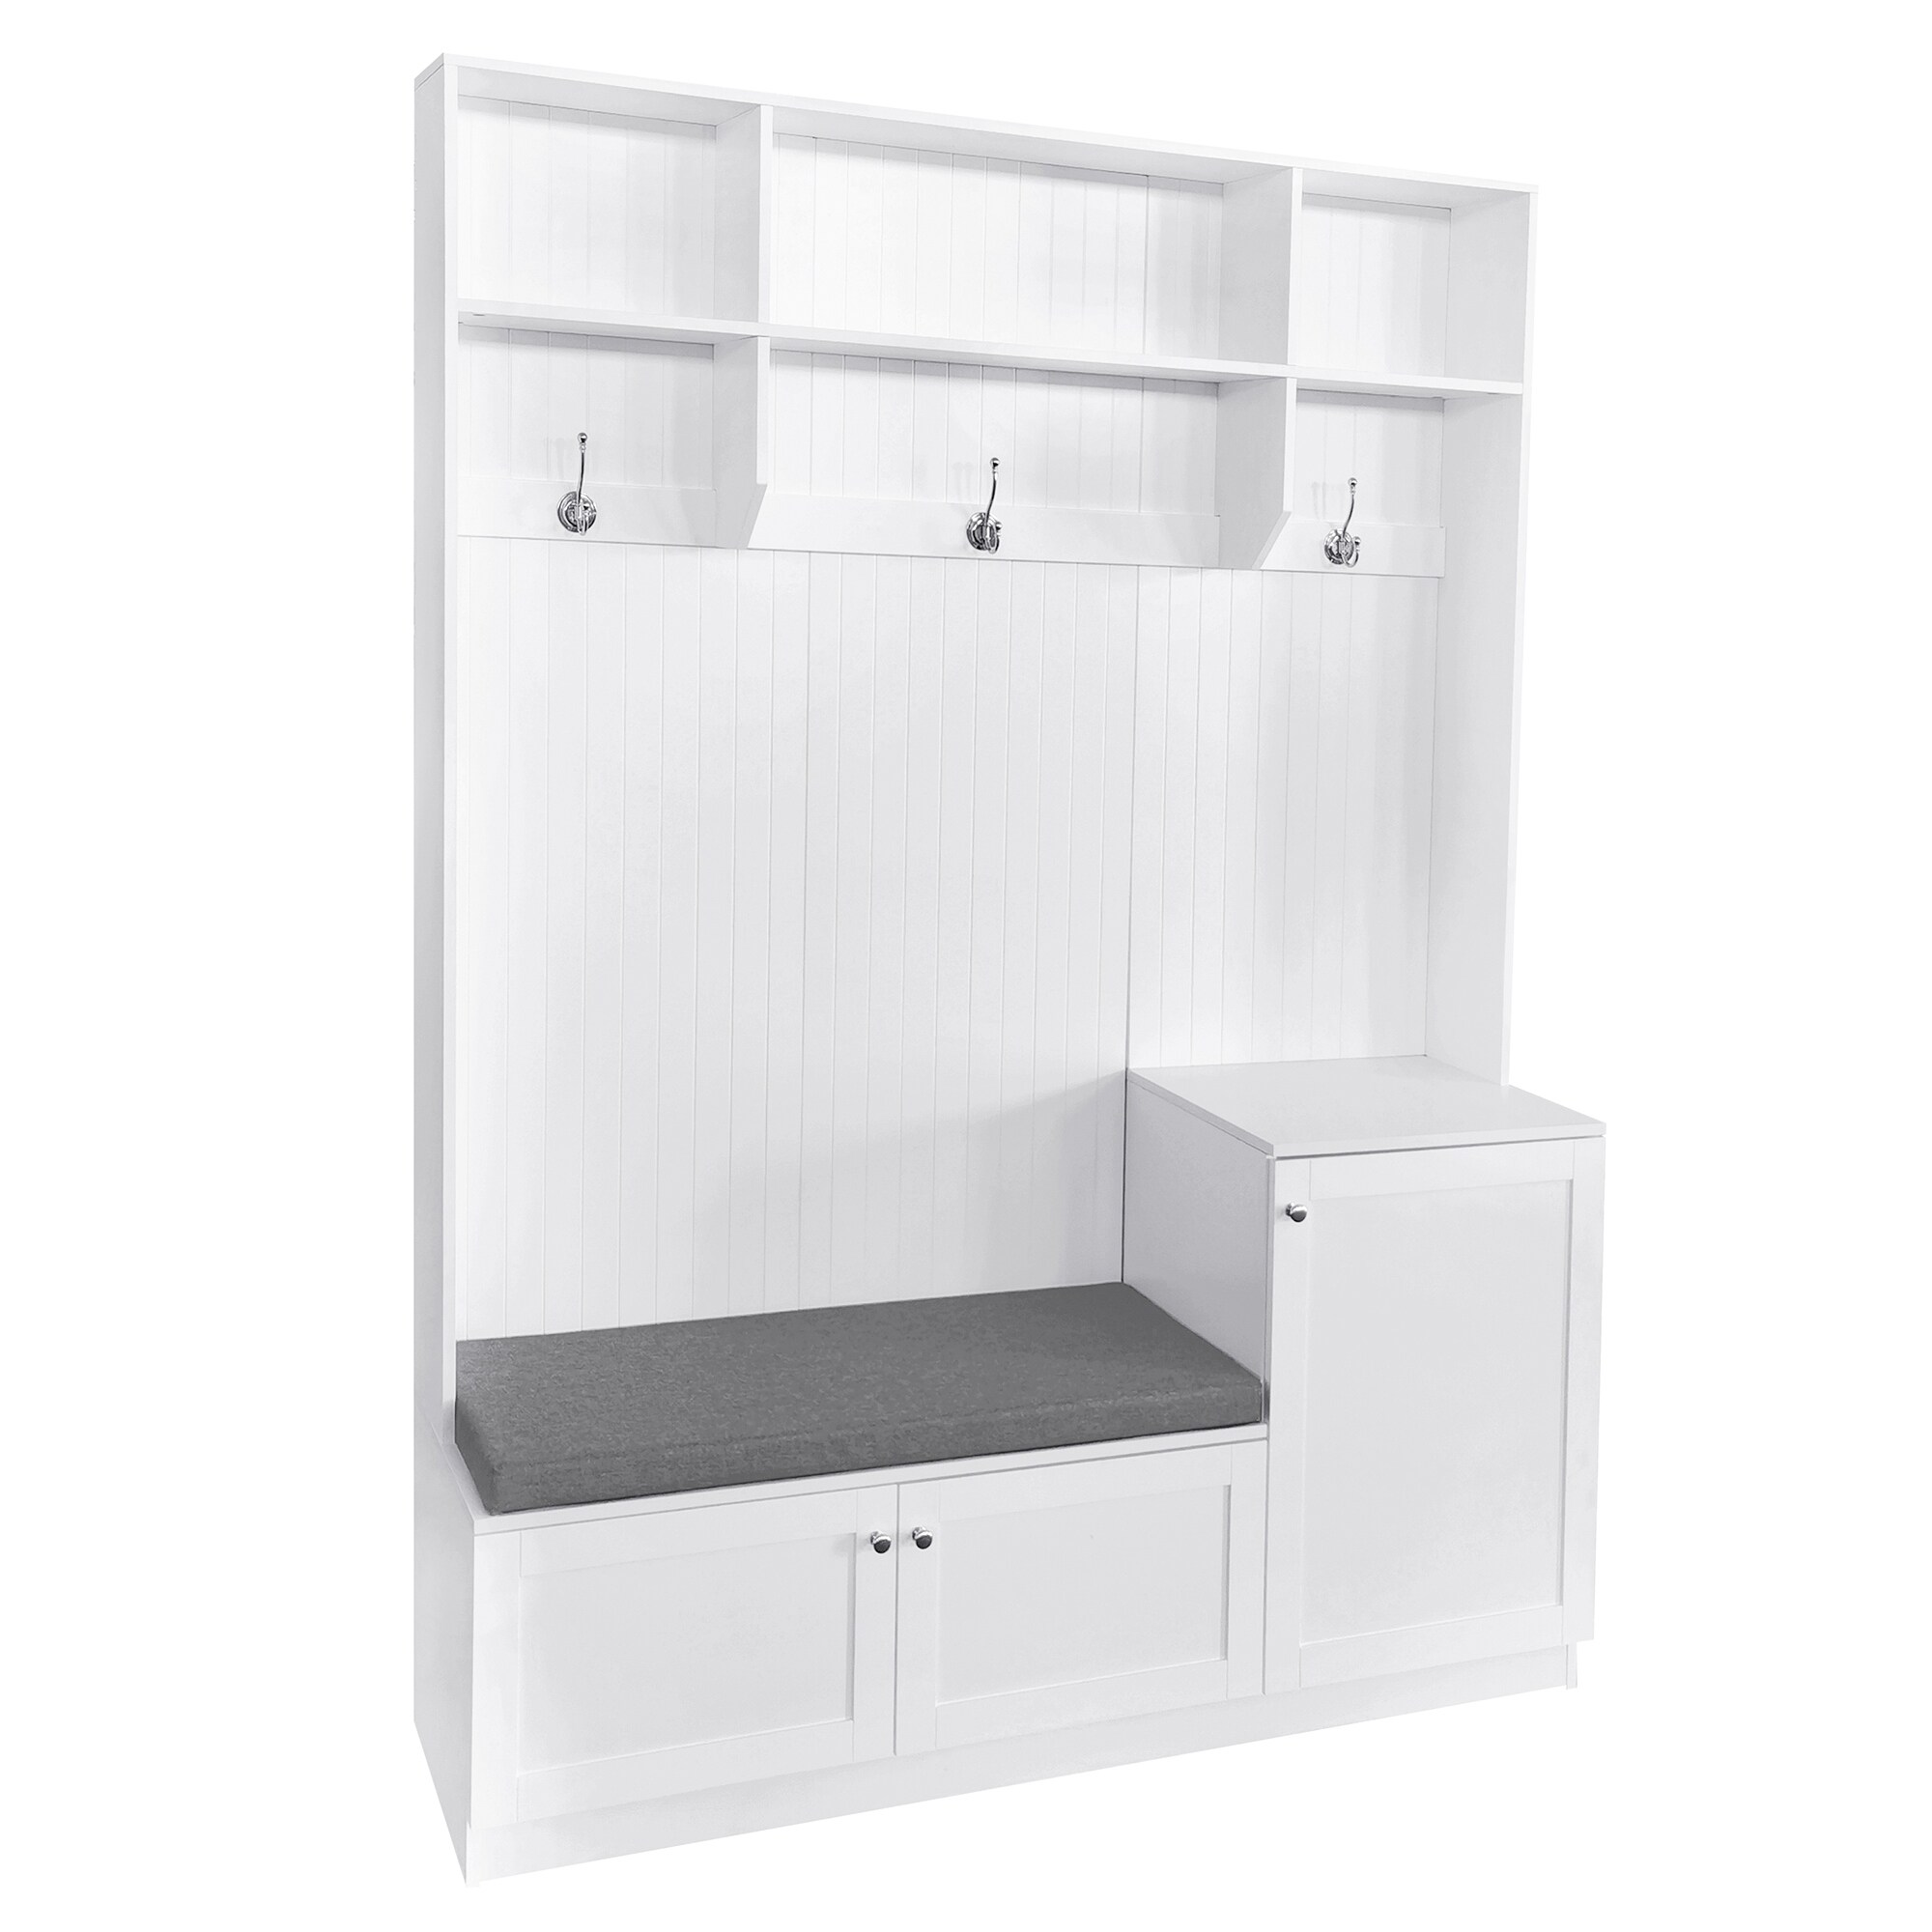 https://ak1.ostkcdn.com/images/products/is/images/direct/08b3eff90e16a2638dc66d8620485a1f2111f4f3/White-Hall-Tree-Hallway-Shoe-Cabinet-with-Storage-Bench-%26-Padded-Seat-Cushion%2C-Modern-Free-Stand-Clothes-Hat-Rack-for-Entryways.jpg